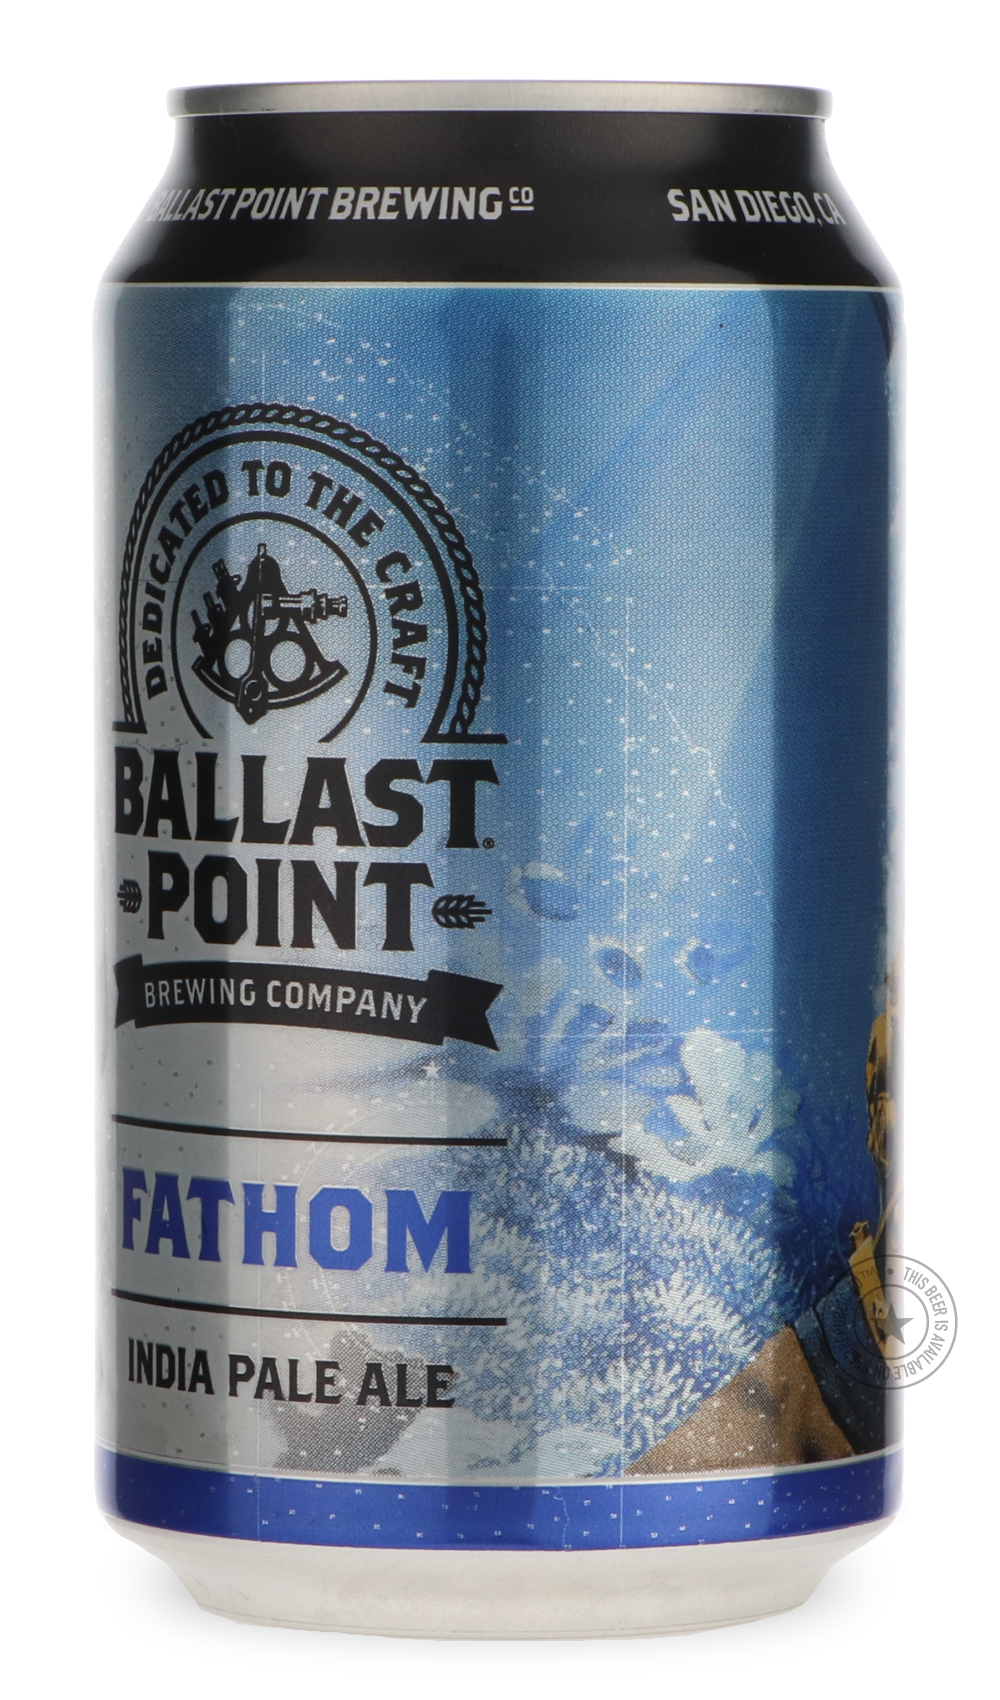 -Ballast Point- Fathom-IPA- Only @ Beer Republic - The best online beer store for American & Canadian craft beer - Buy beer online from the USA and Canada - Bier online kopen - Amerikaans bier kopen - Craft beer store - Craft beer kopen - Amerikanisch bier kaufen - Bier online kaufen - Acheter biere online - IPA - Stout - Porter - New England IPA - Hazy IPA - Imperial Stout - Barrel Aged - Barrel Aged Imperial Stout - Brown - Dark beer - Blond - Blonde - Pilsner - Lager - Wheat - Weizen - Amber - Barley Win